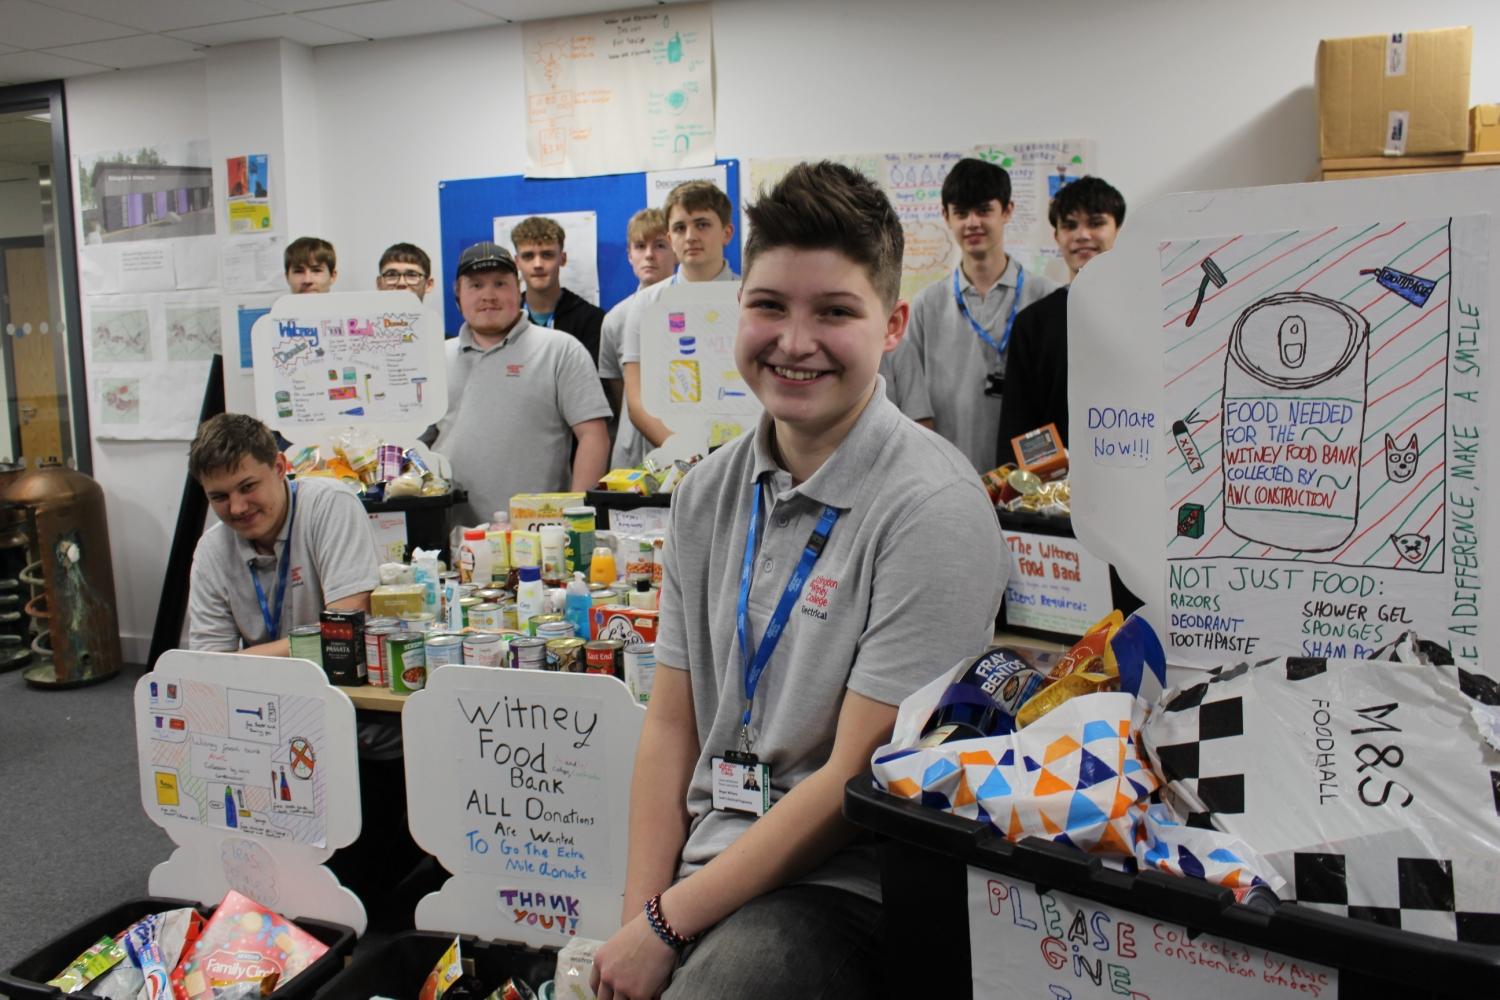 Students delighted with the final collection for the Witney Food Bank